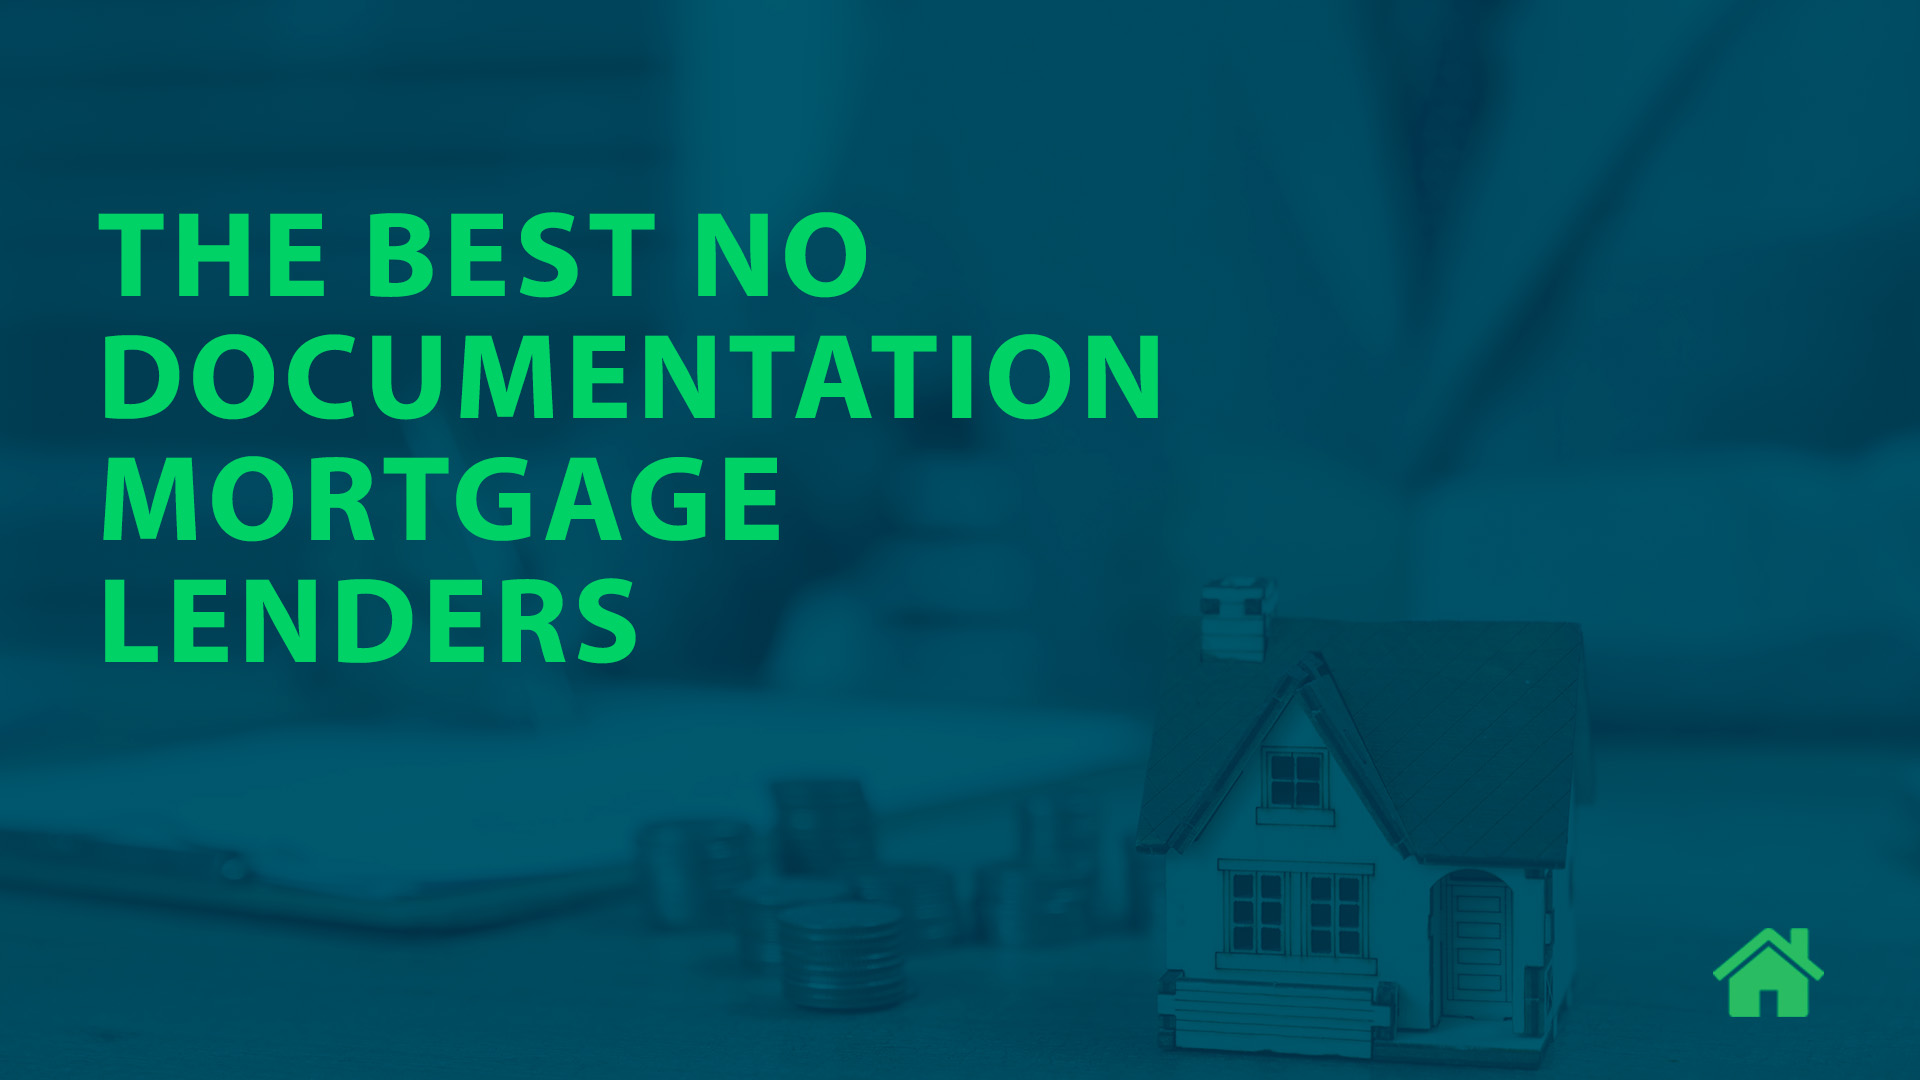 The Best No Documentation Mortgage Lenders